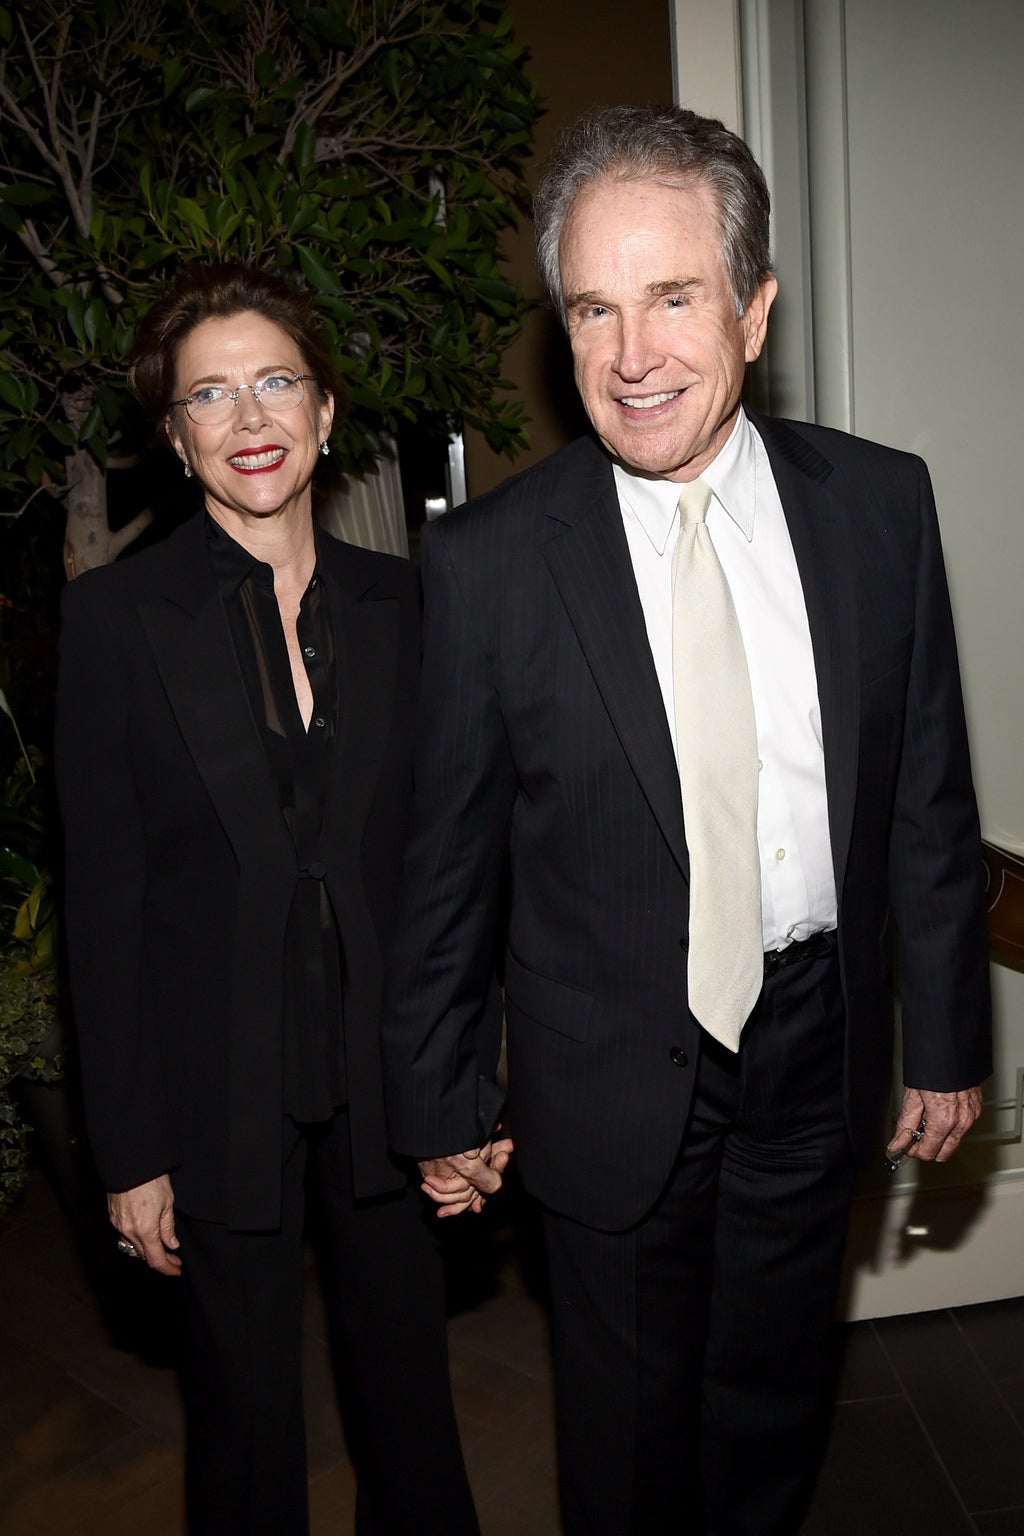 The couple in 2014.